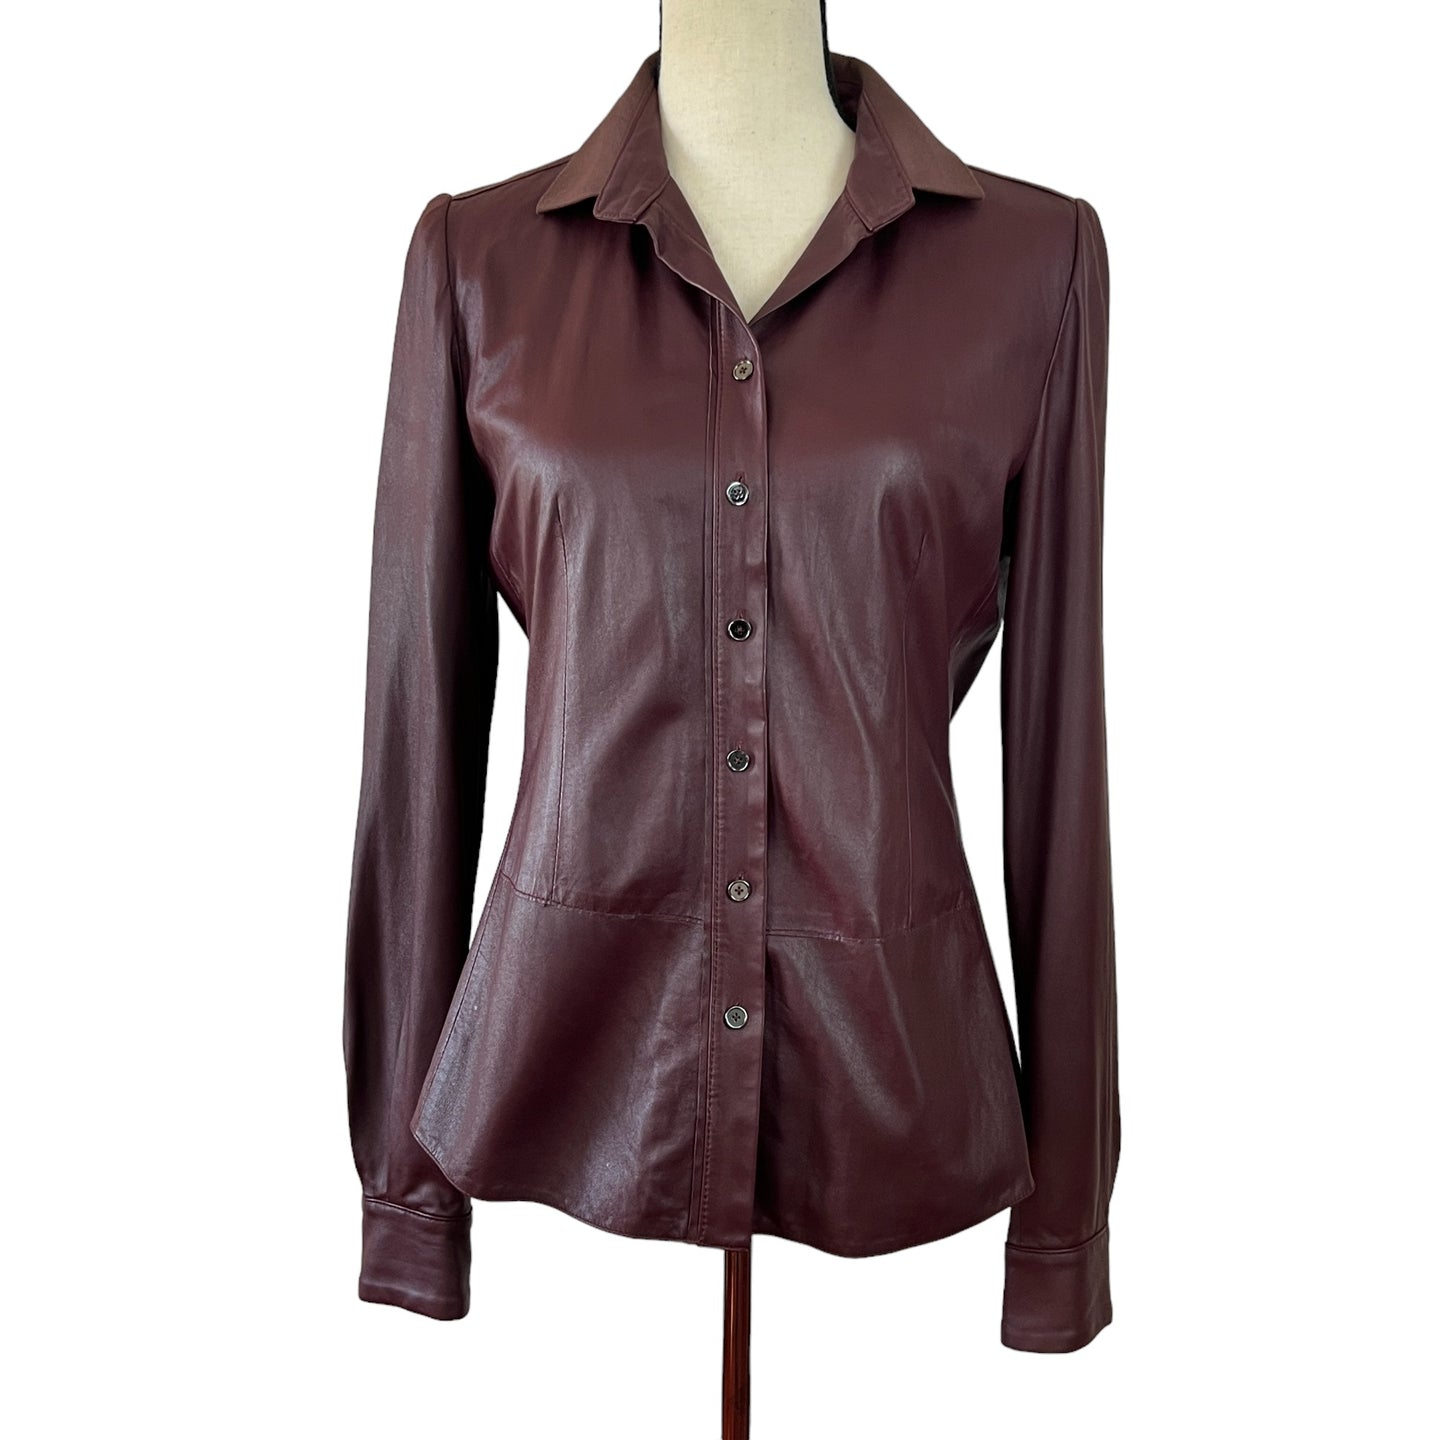 Elie Tahari Brown Leather Button-Up Shirt Size Small/Petite